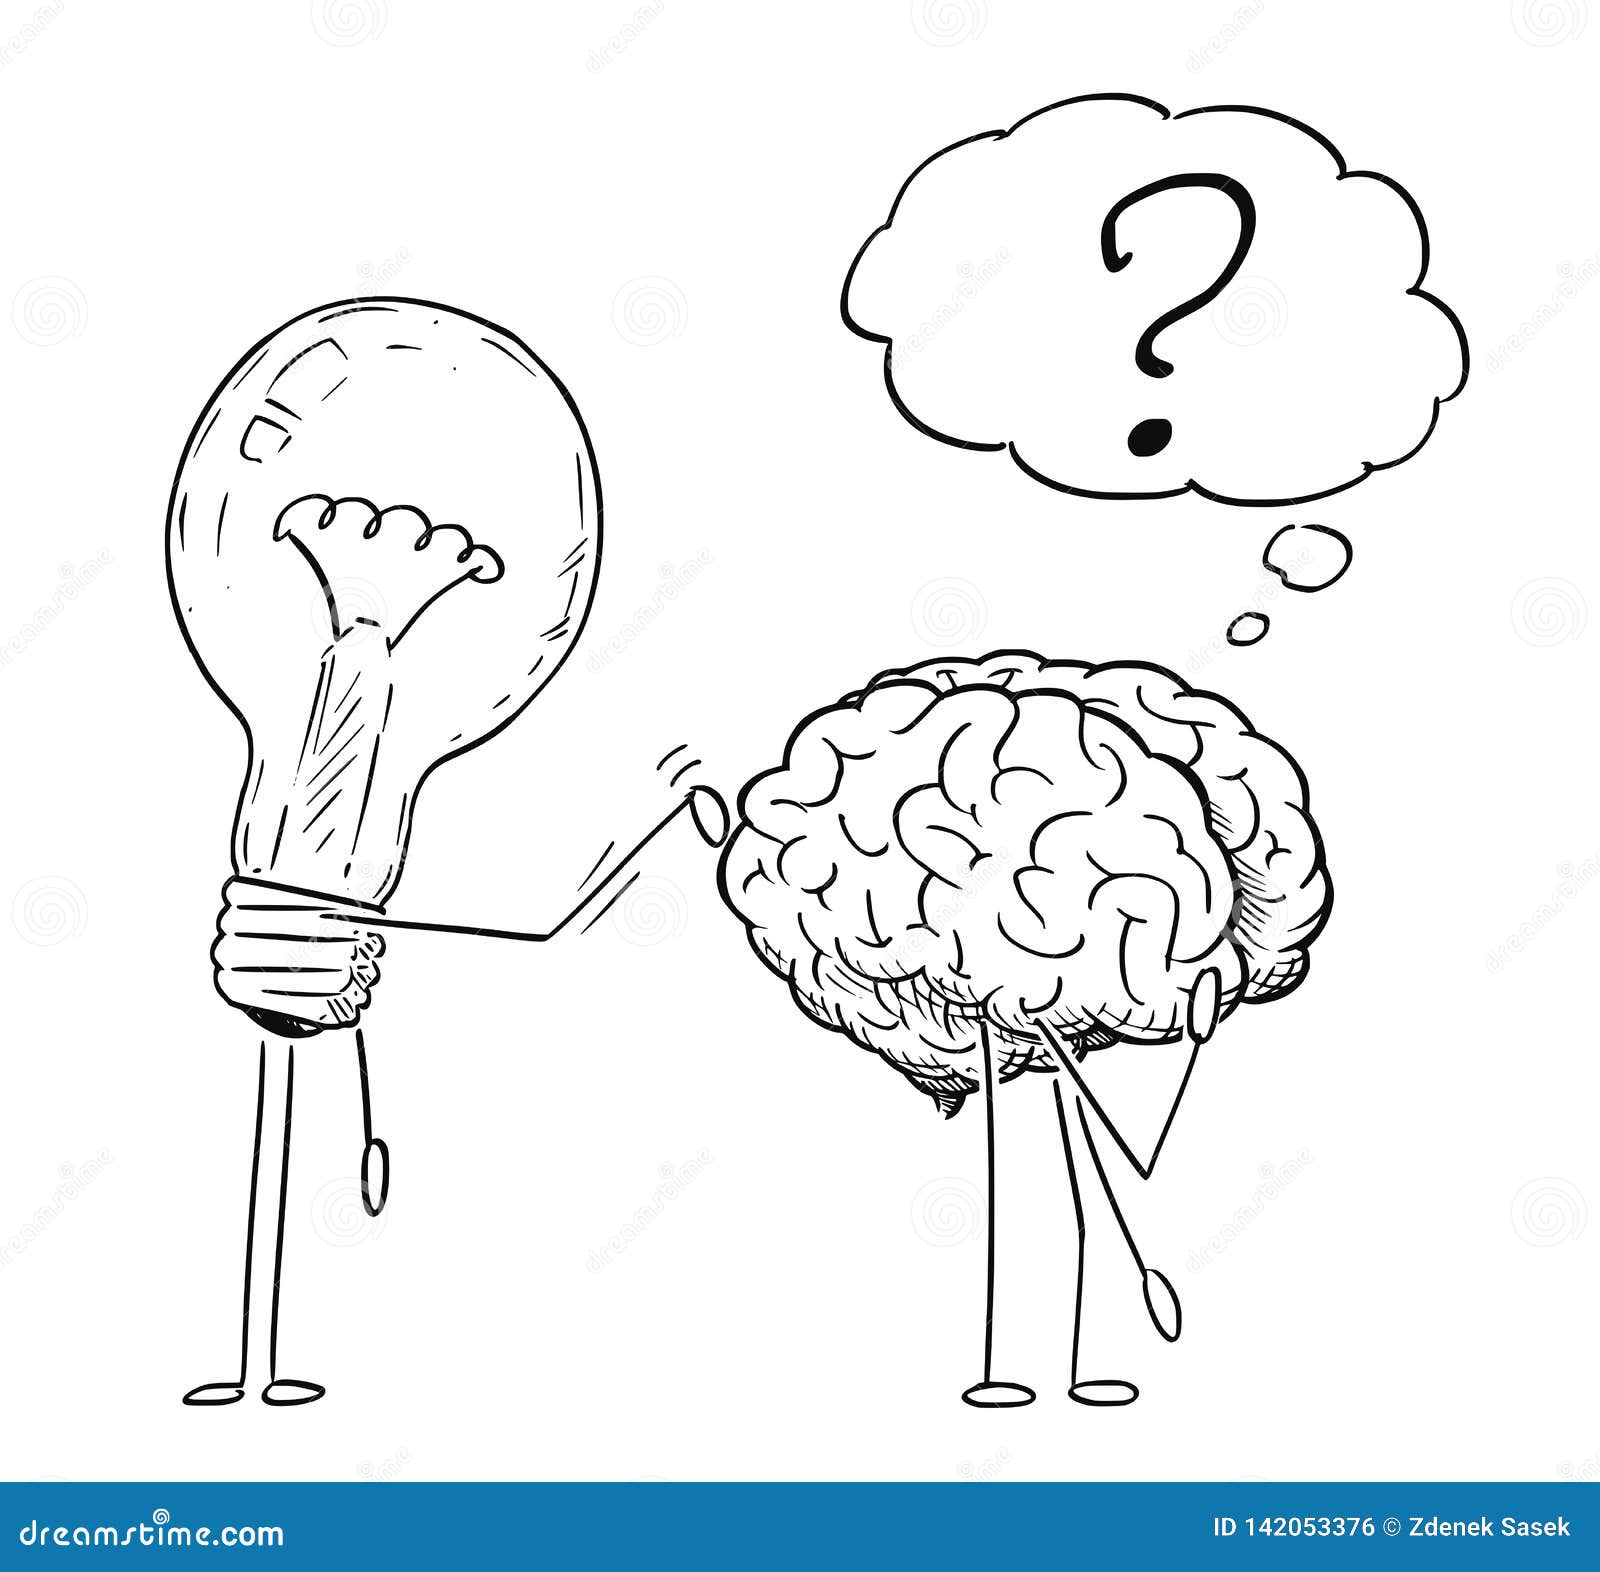 Cartoon Drawing of Lightbulb Characters Taping on Back of Thinking Brain  Stock Vector - Illustration of creative, drawing: 142053376